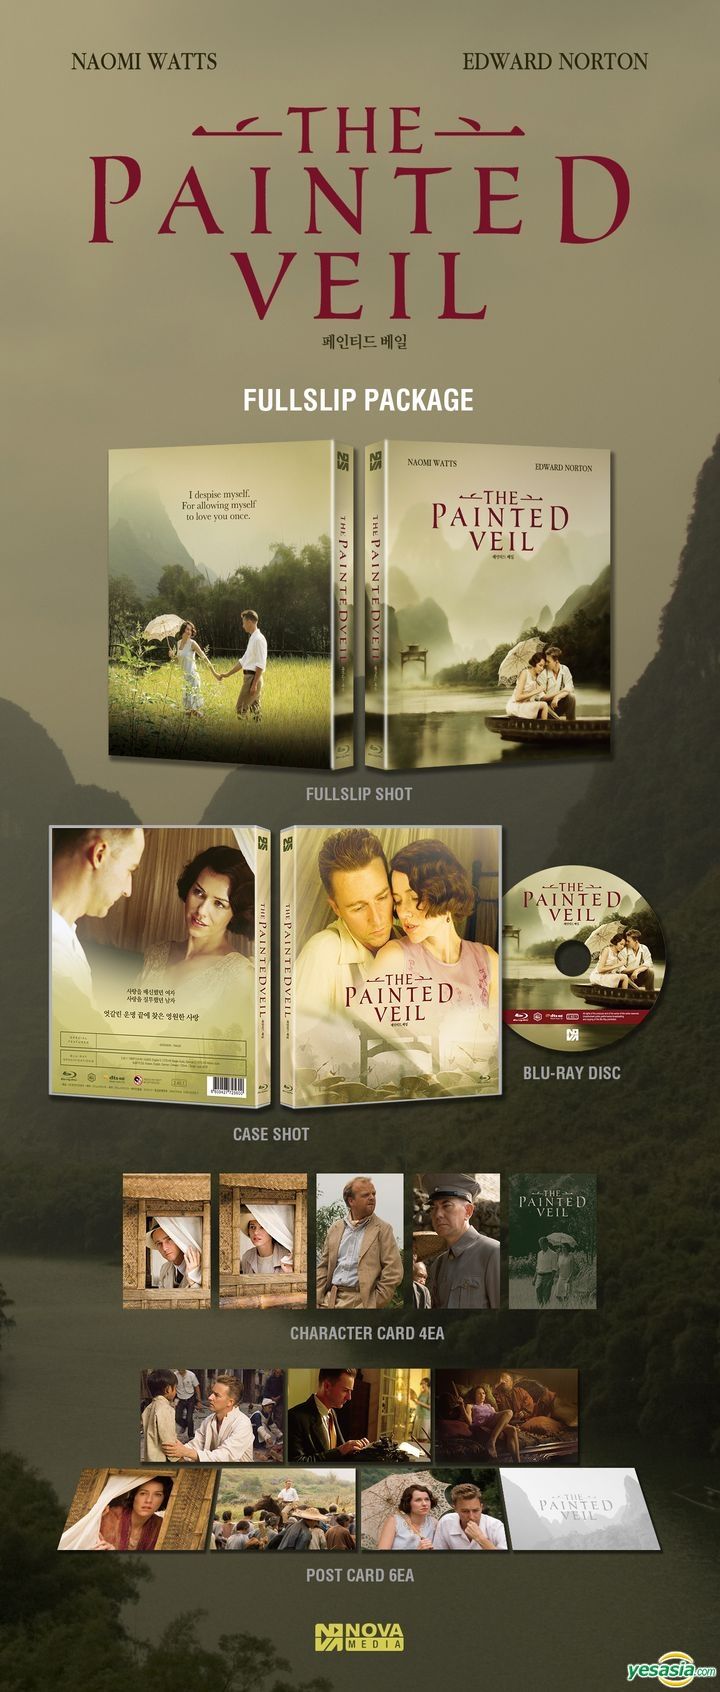  The Painted Veil [DVD] : Movies & TV